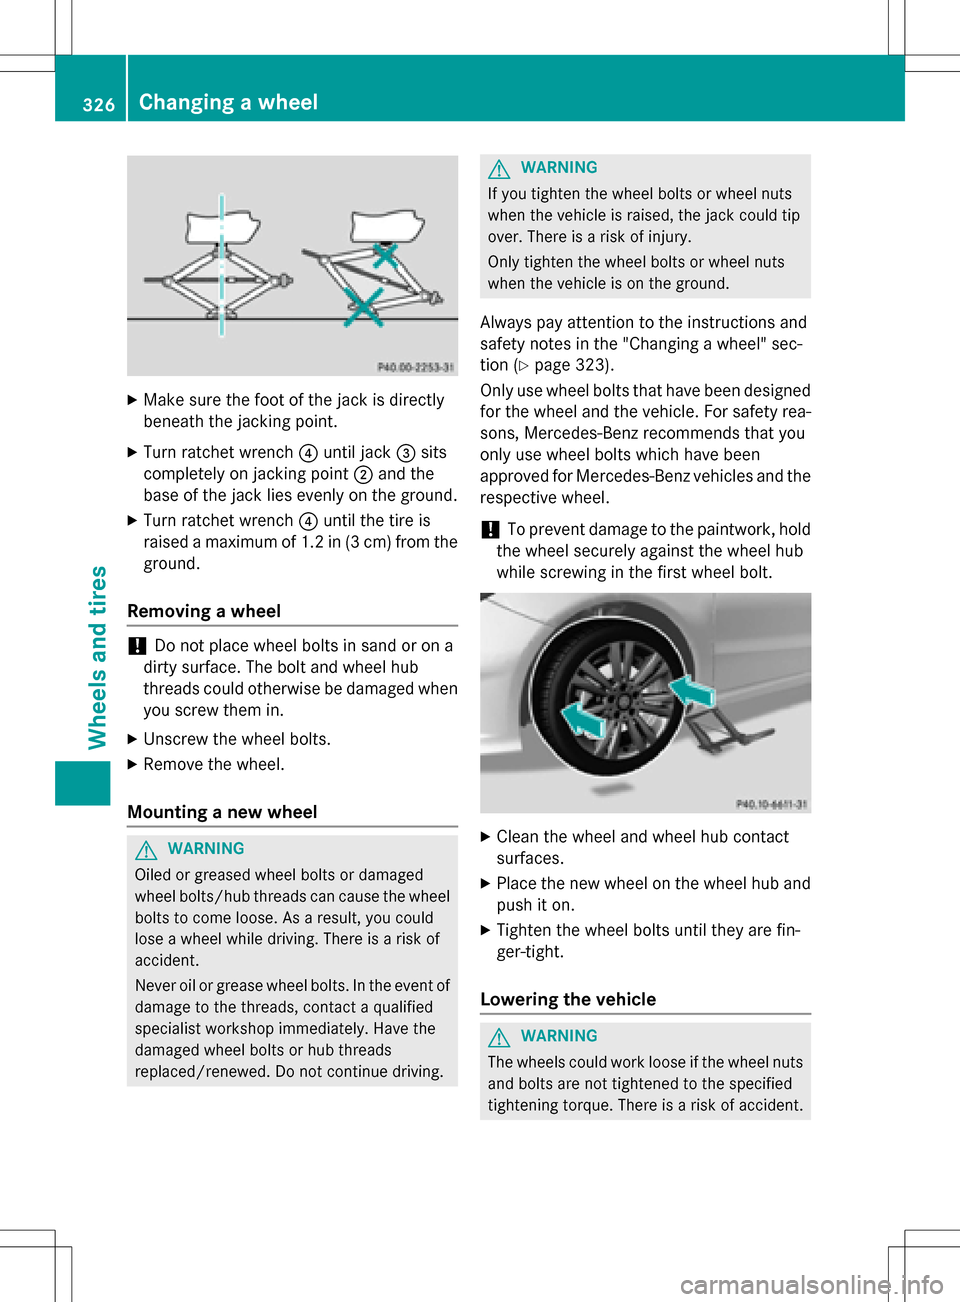 MERCEDES-BENZ B-Class ELECTRIC 2016 W246 Owners Manual XMake sure the foot of the jack is directly
beneath the jacking point.
XTurn ratchet wrench?until jack =sits
completely on jacking point ;and the
base of the jack lies evenly on the ground.
XTurn ratc